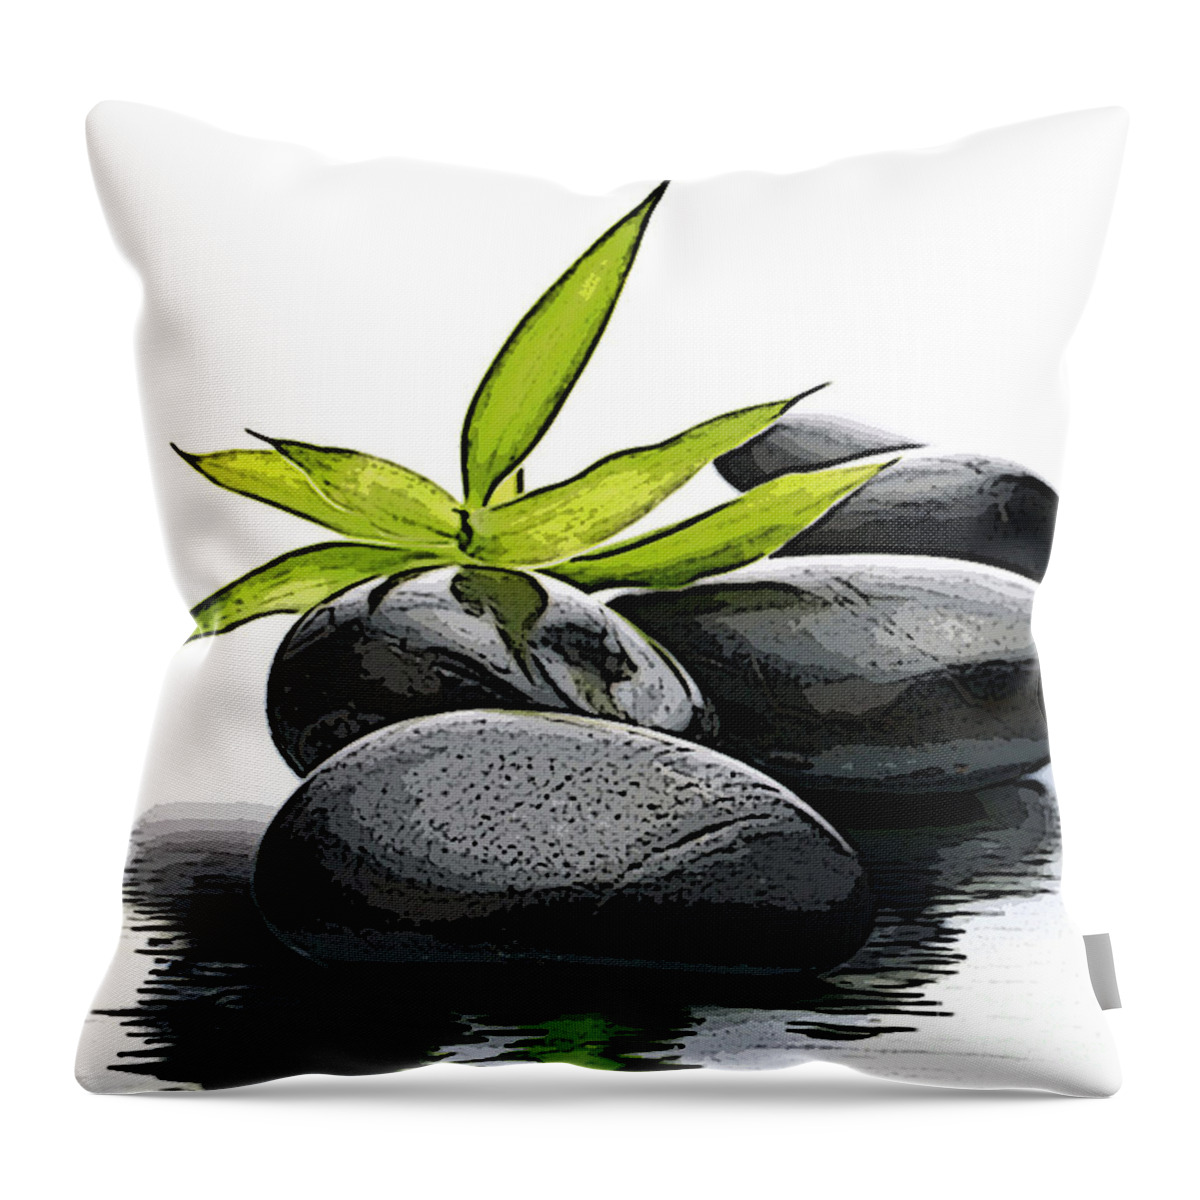 Home Art Throw Pillow featuring the mixed media Rock Art by Marvin Blaine